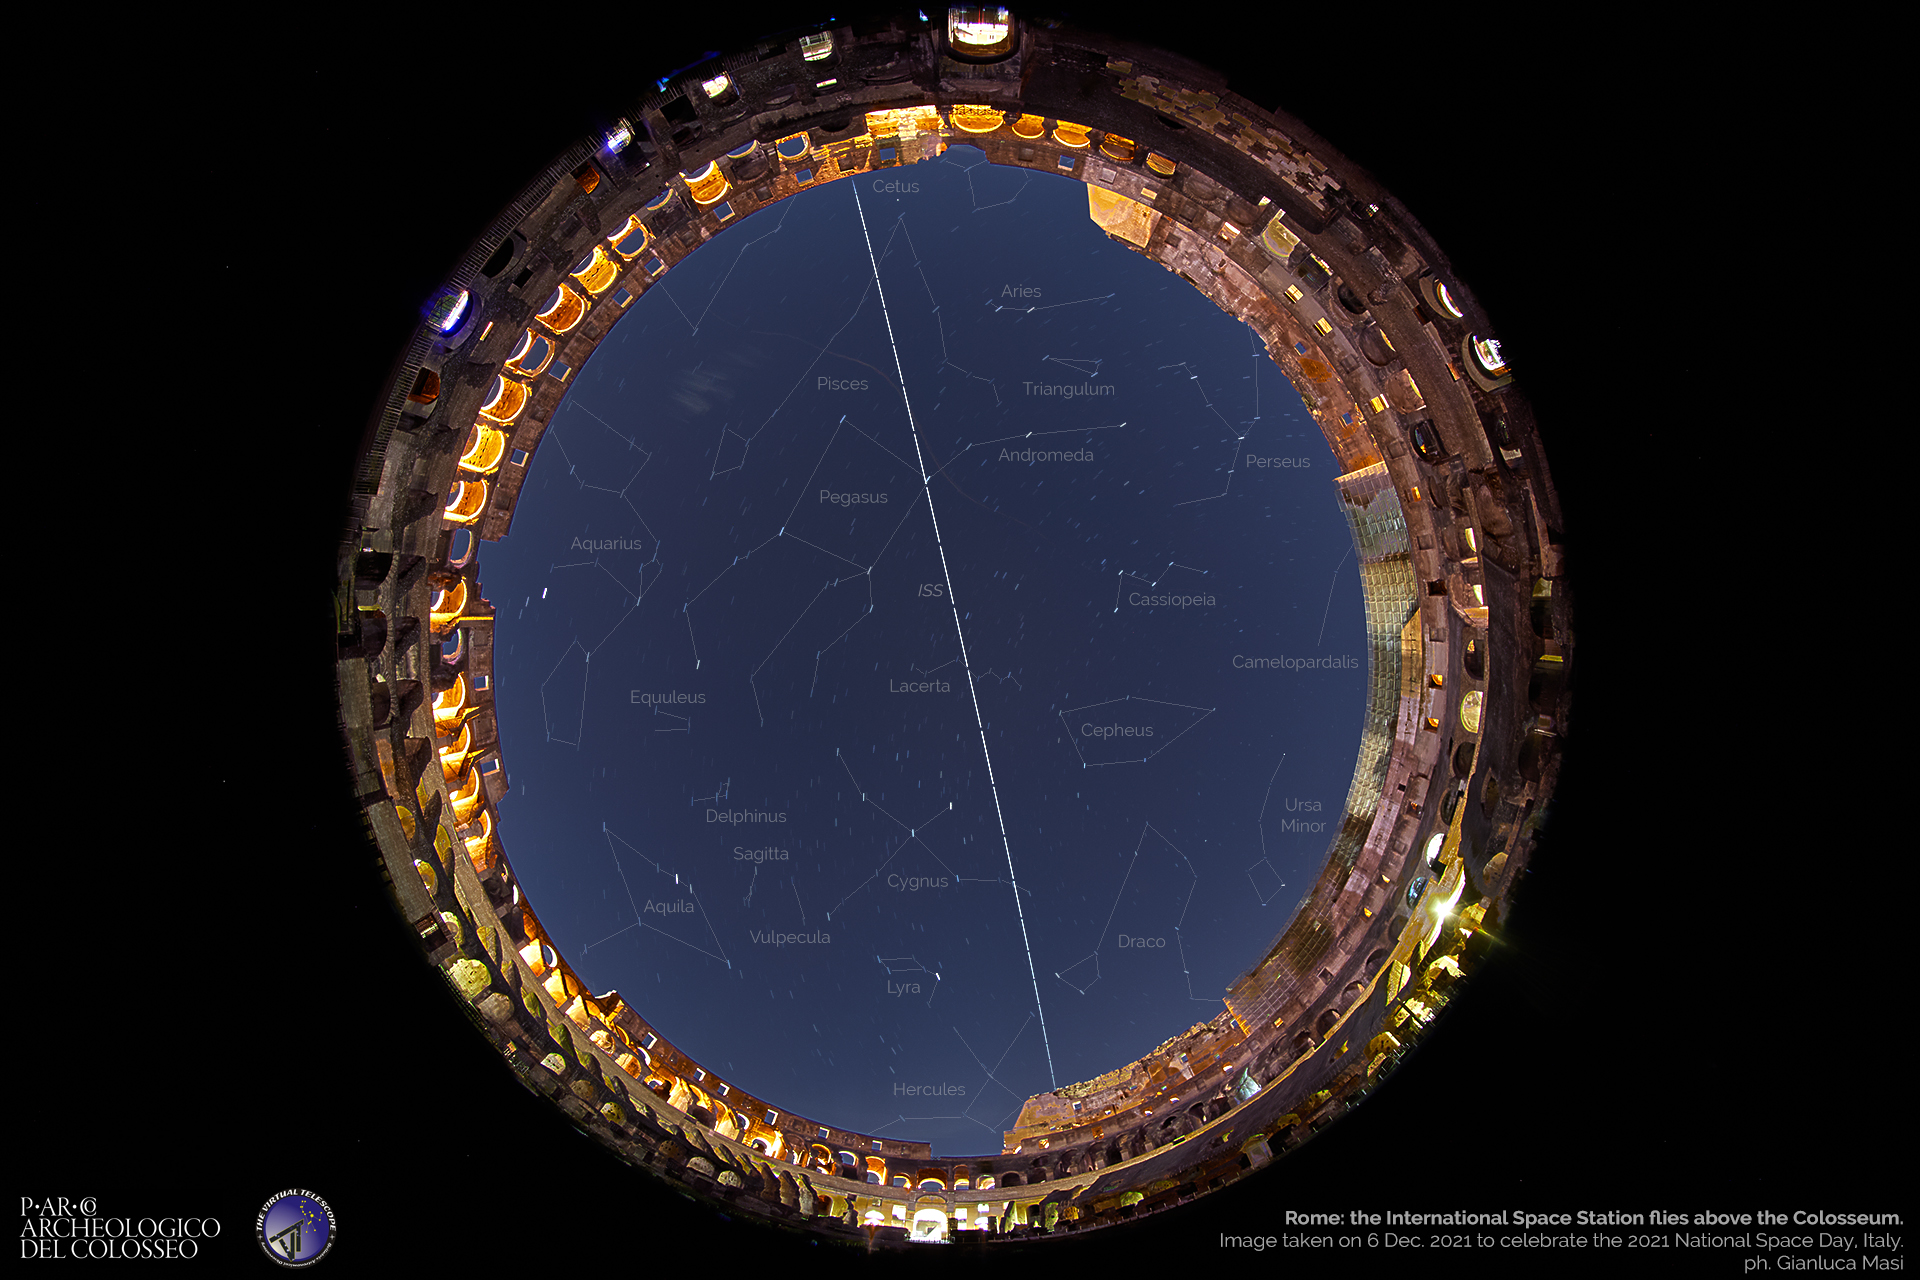 The International Space Station crosses the constellations above the Colosseum. 6 Dec. 2021.